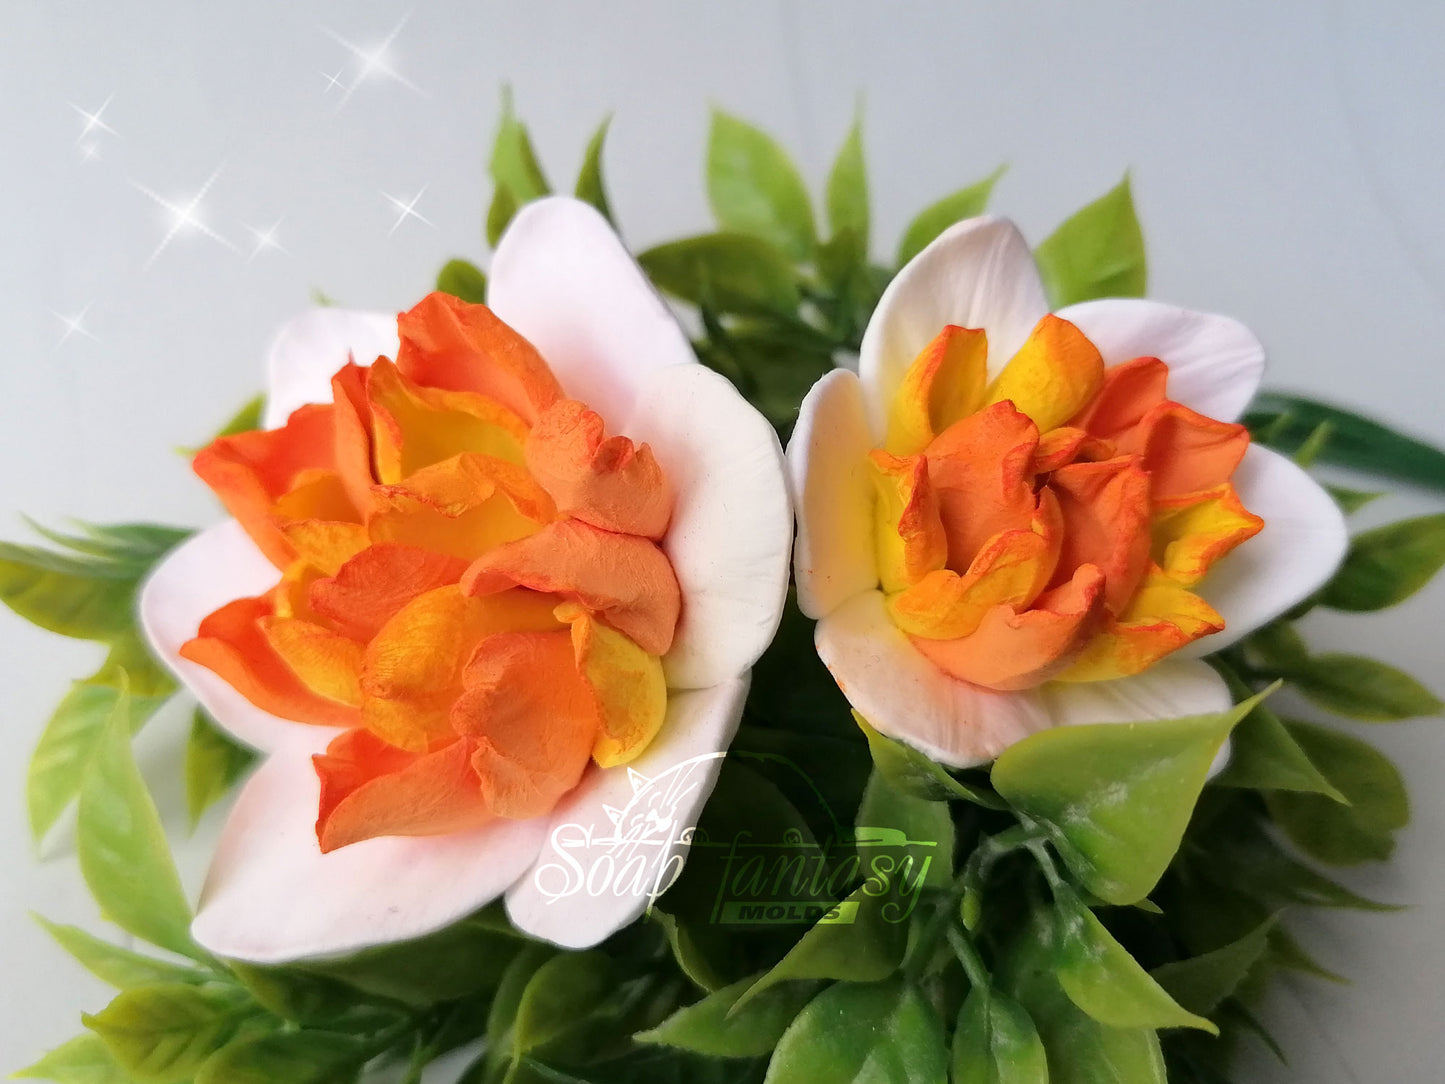 Terry narcissus / daffodil flower silicone mold for soap making